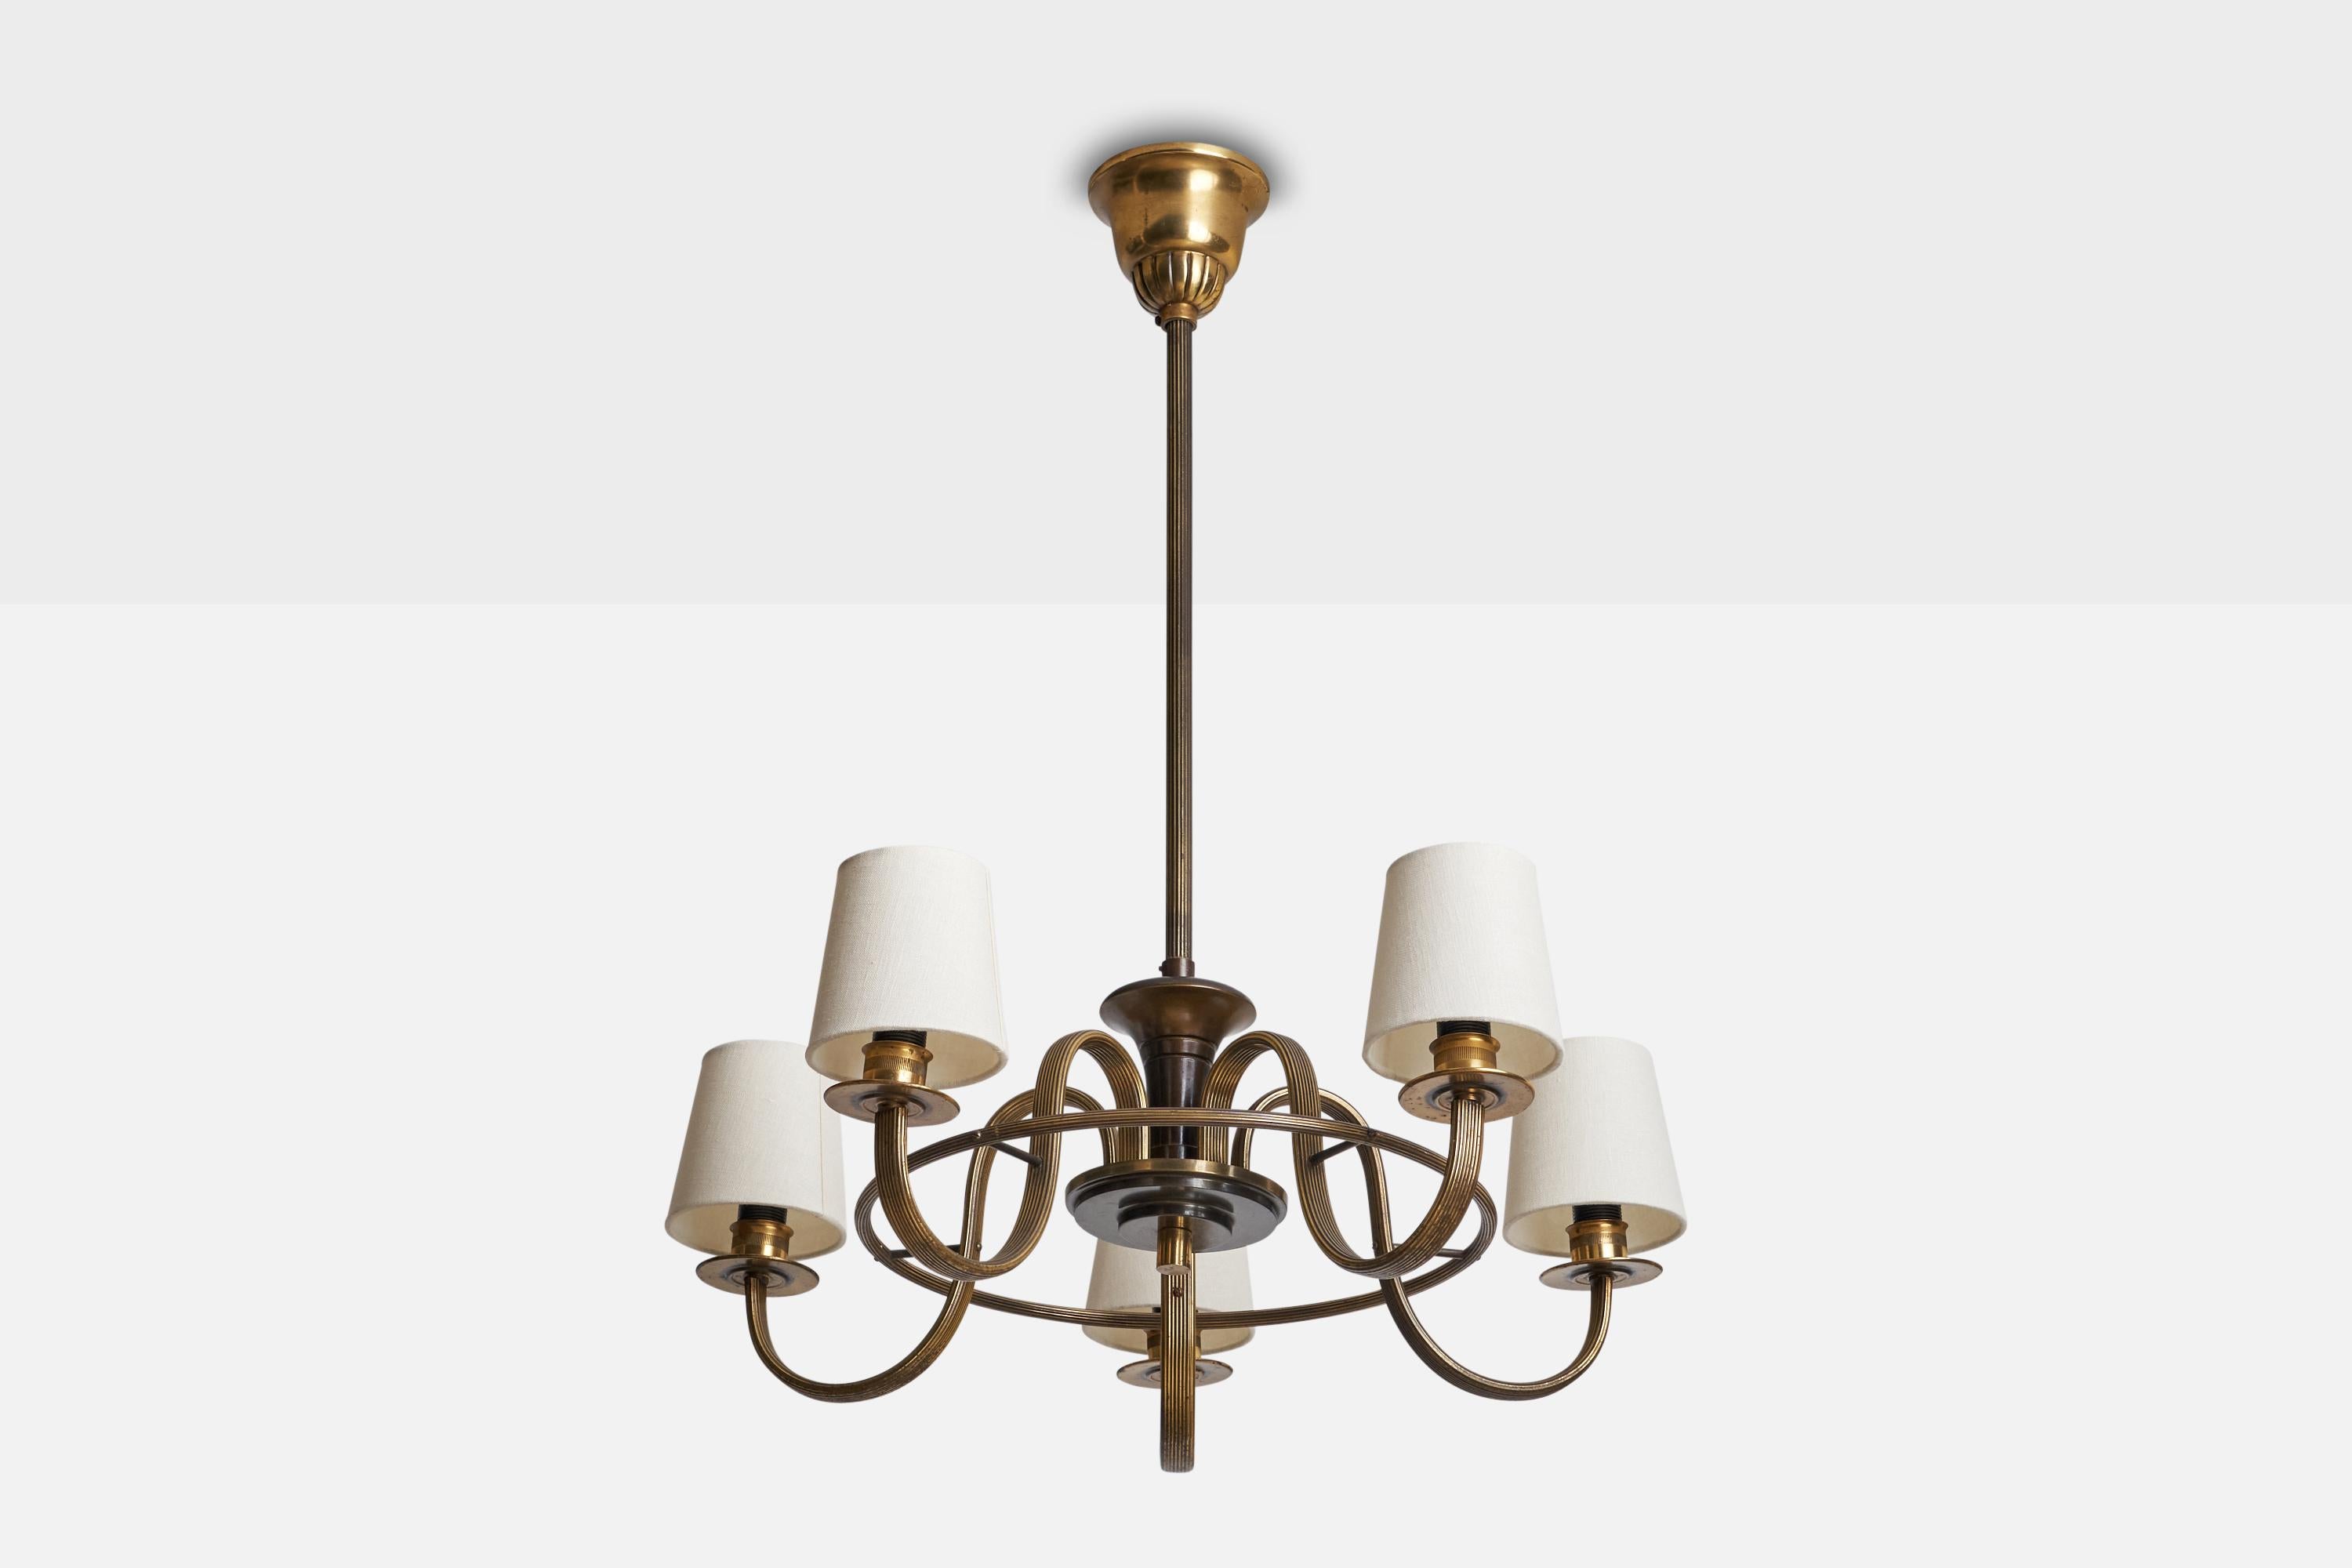 A brass and white fabric chandelier designed and produced in Sweden, c. 1940s.

Dimensions of canopy (inches): 3.50”  H x 4.25” Diameter
Socket takes standard E-12 bulbs. 5 sockets.There is no maximum wattage stated on the fixture. All lighting will